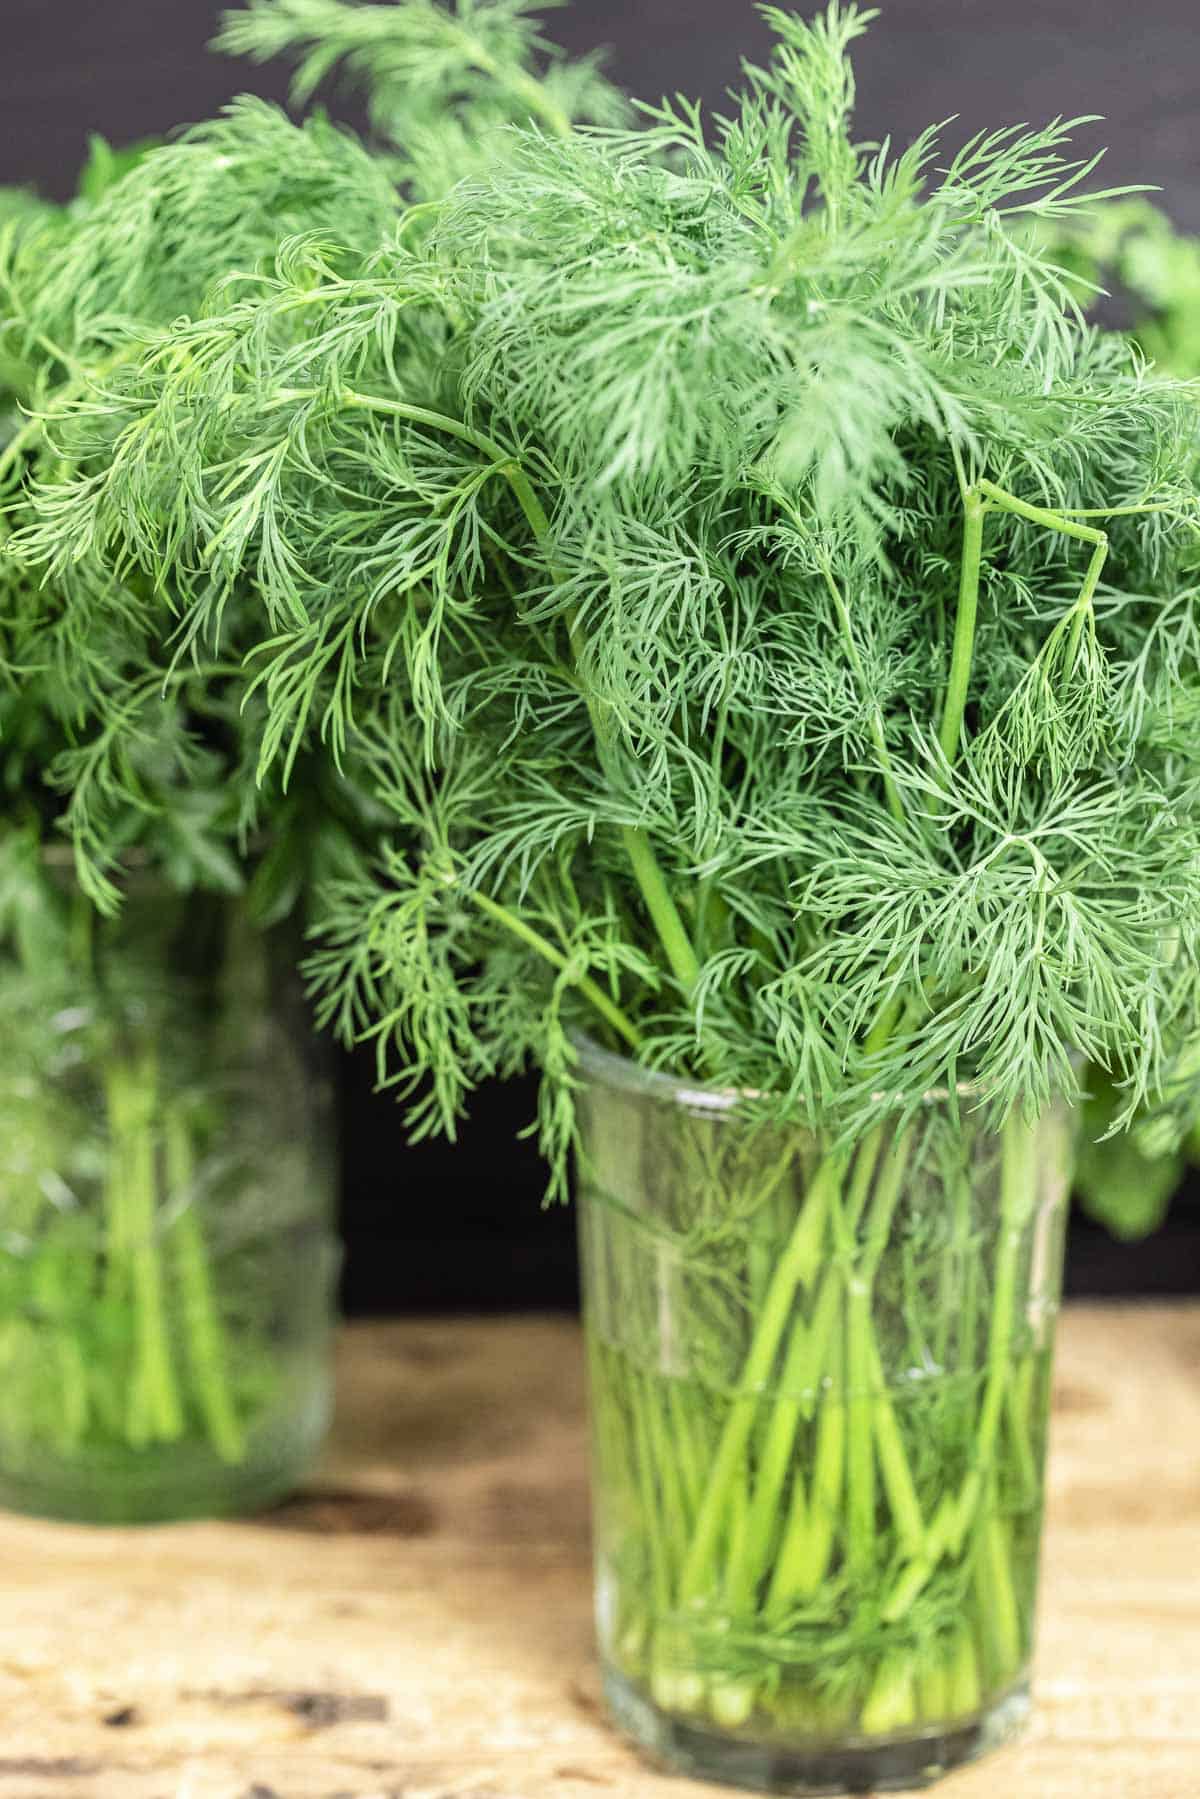 How To Store Herbs 3 